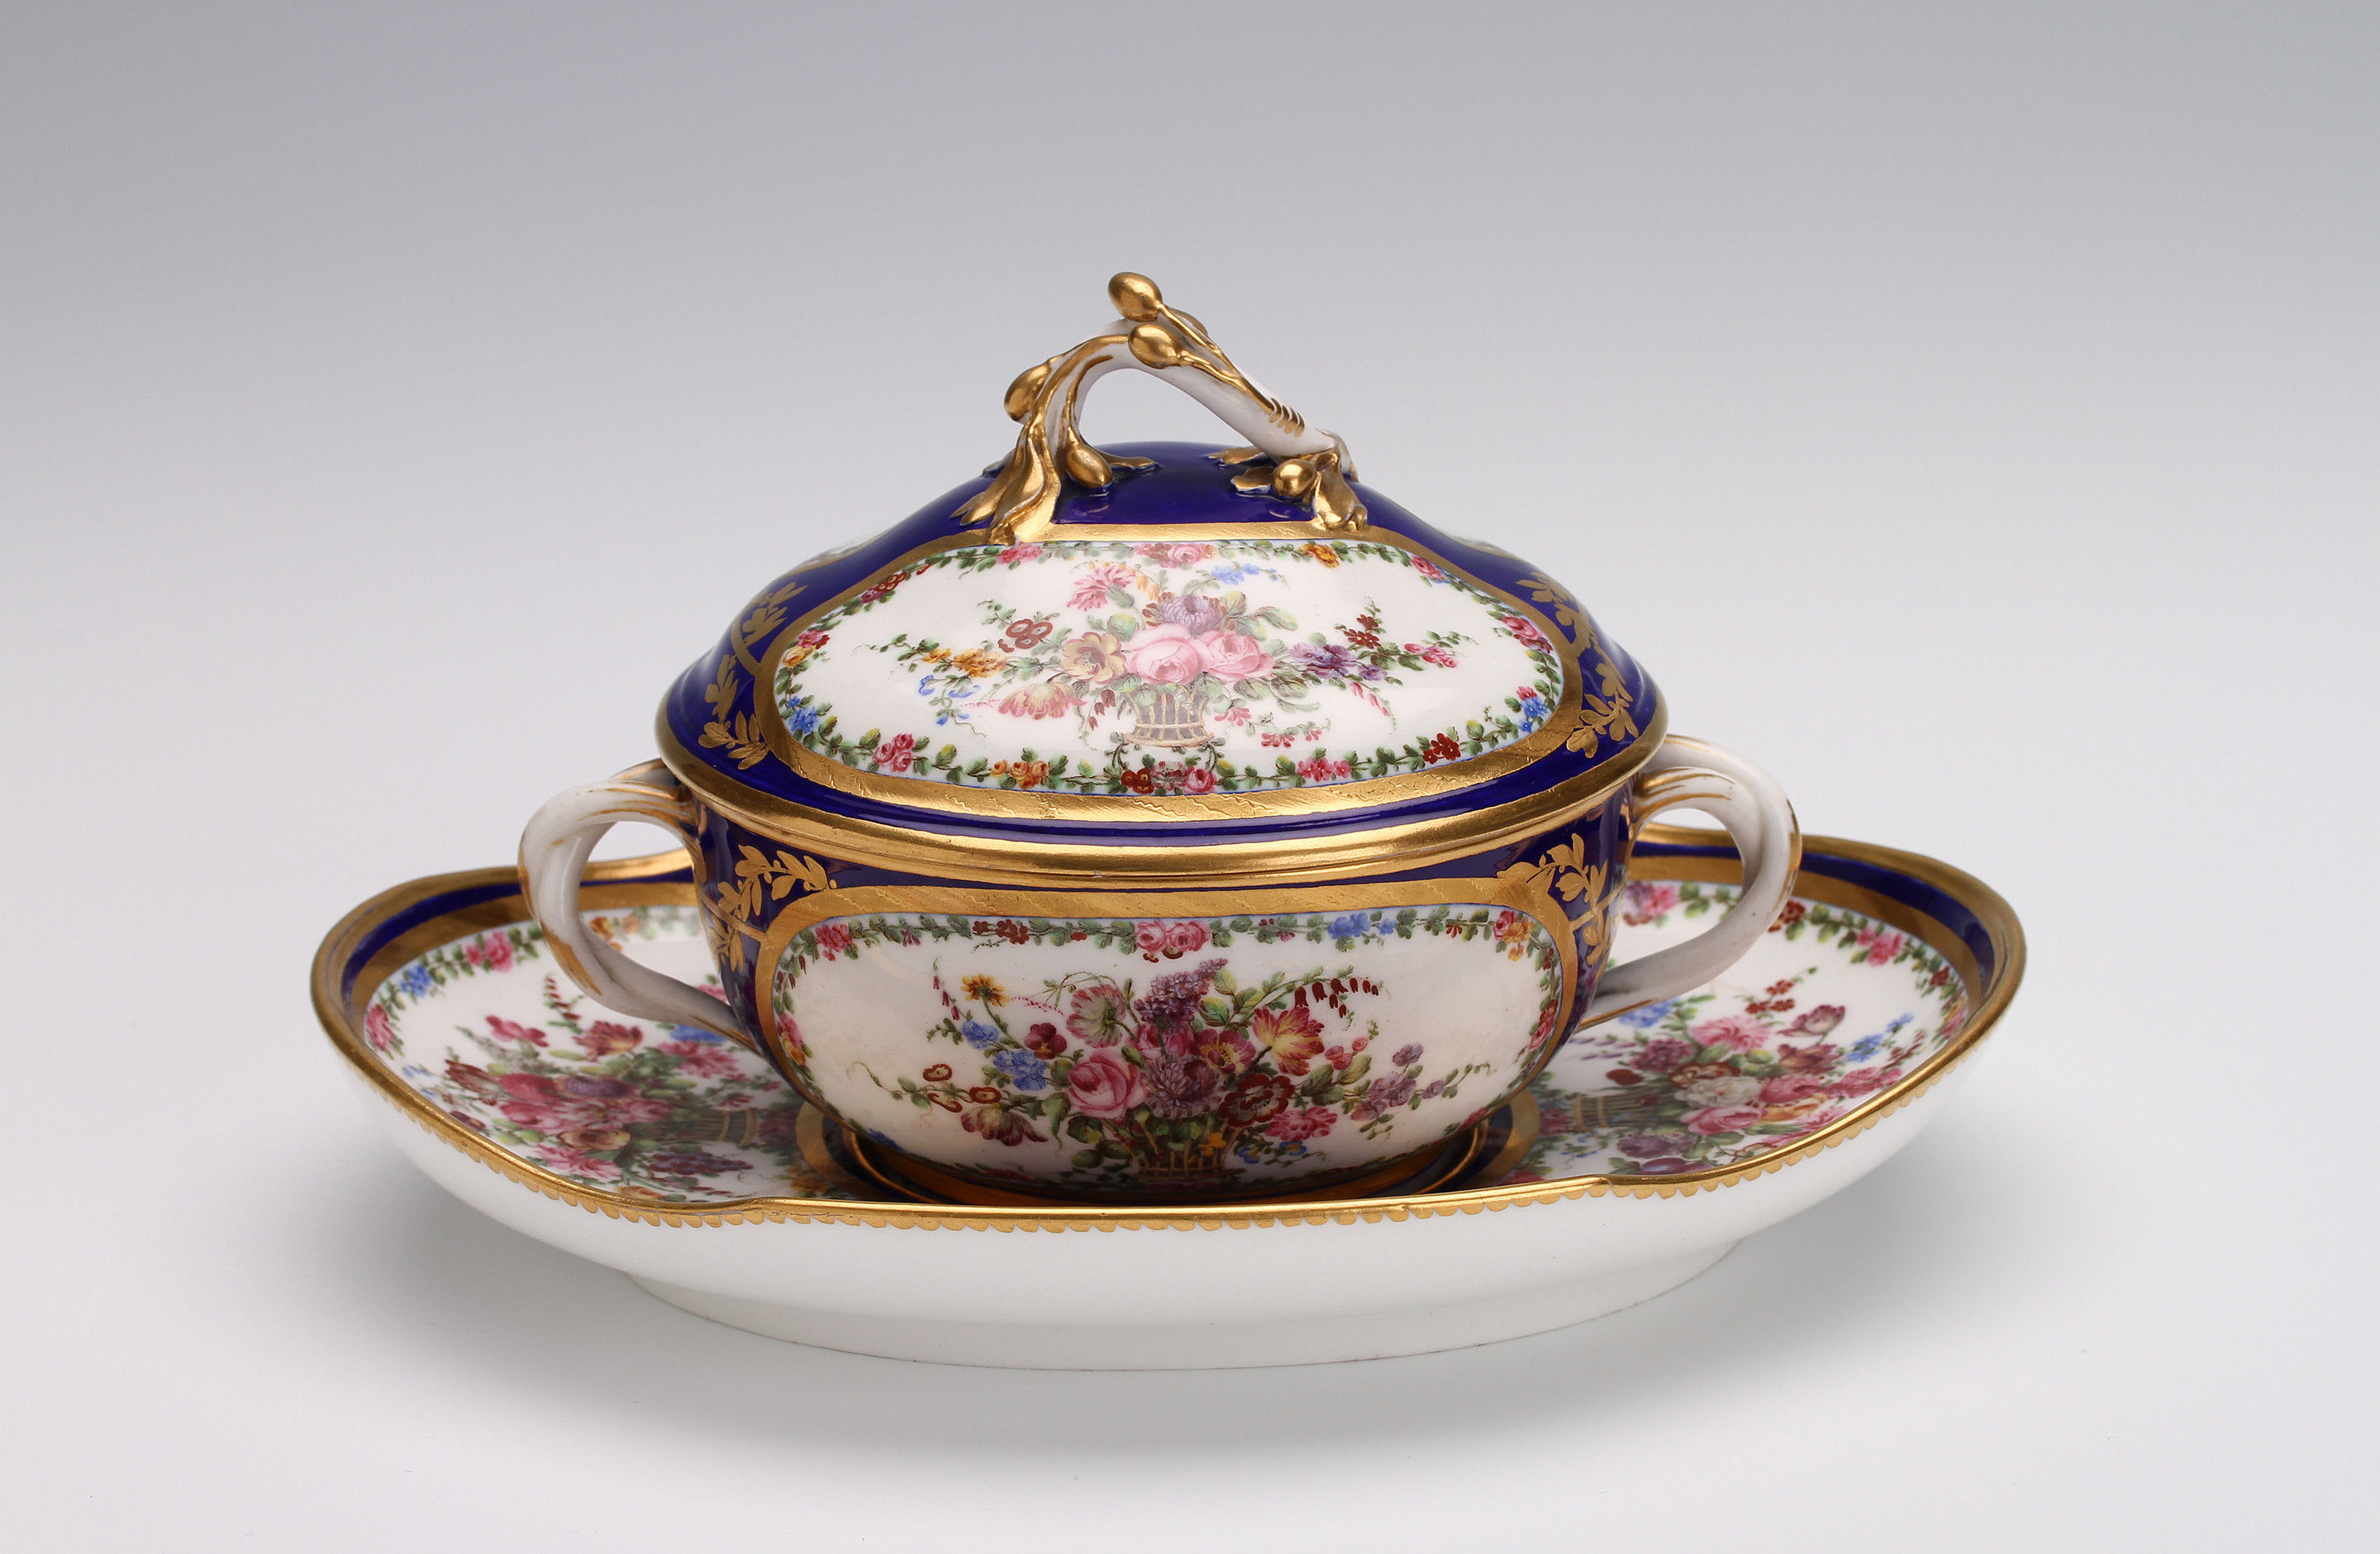 A Sèvres covered bowl and stand, écuelle ‘ronde tournée’ and a plateau ‘ovale’ of the fourth size